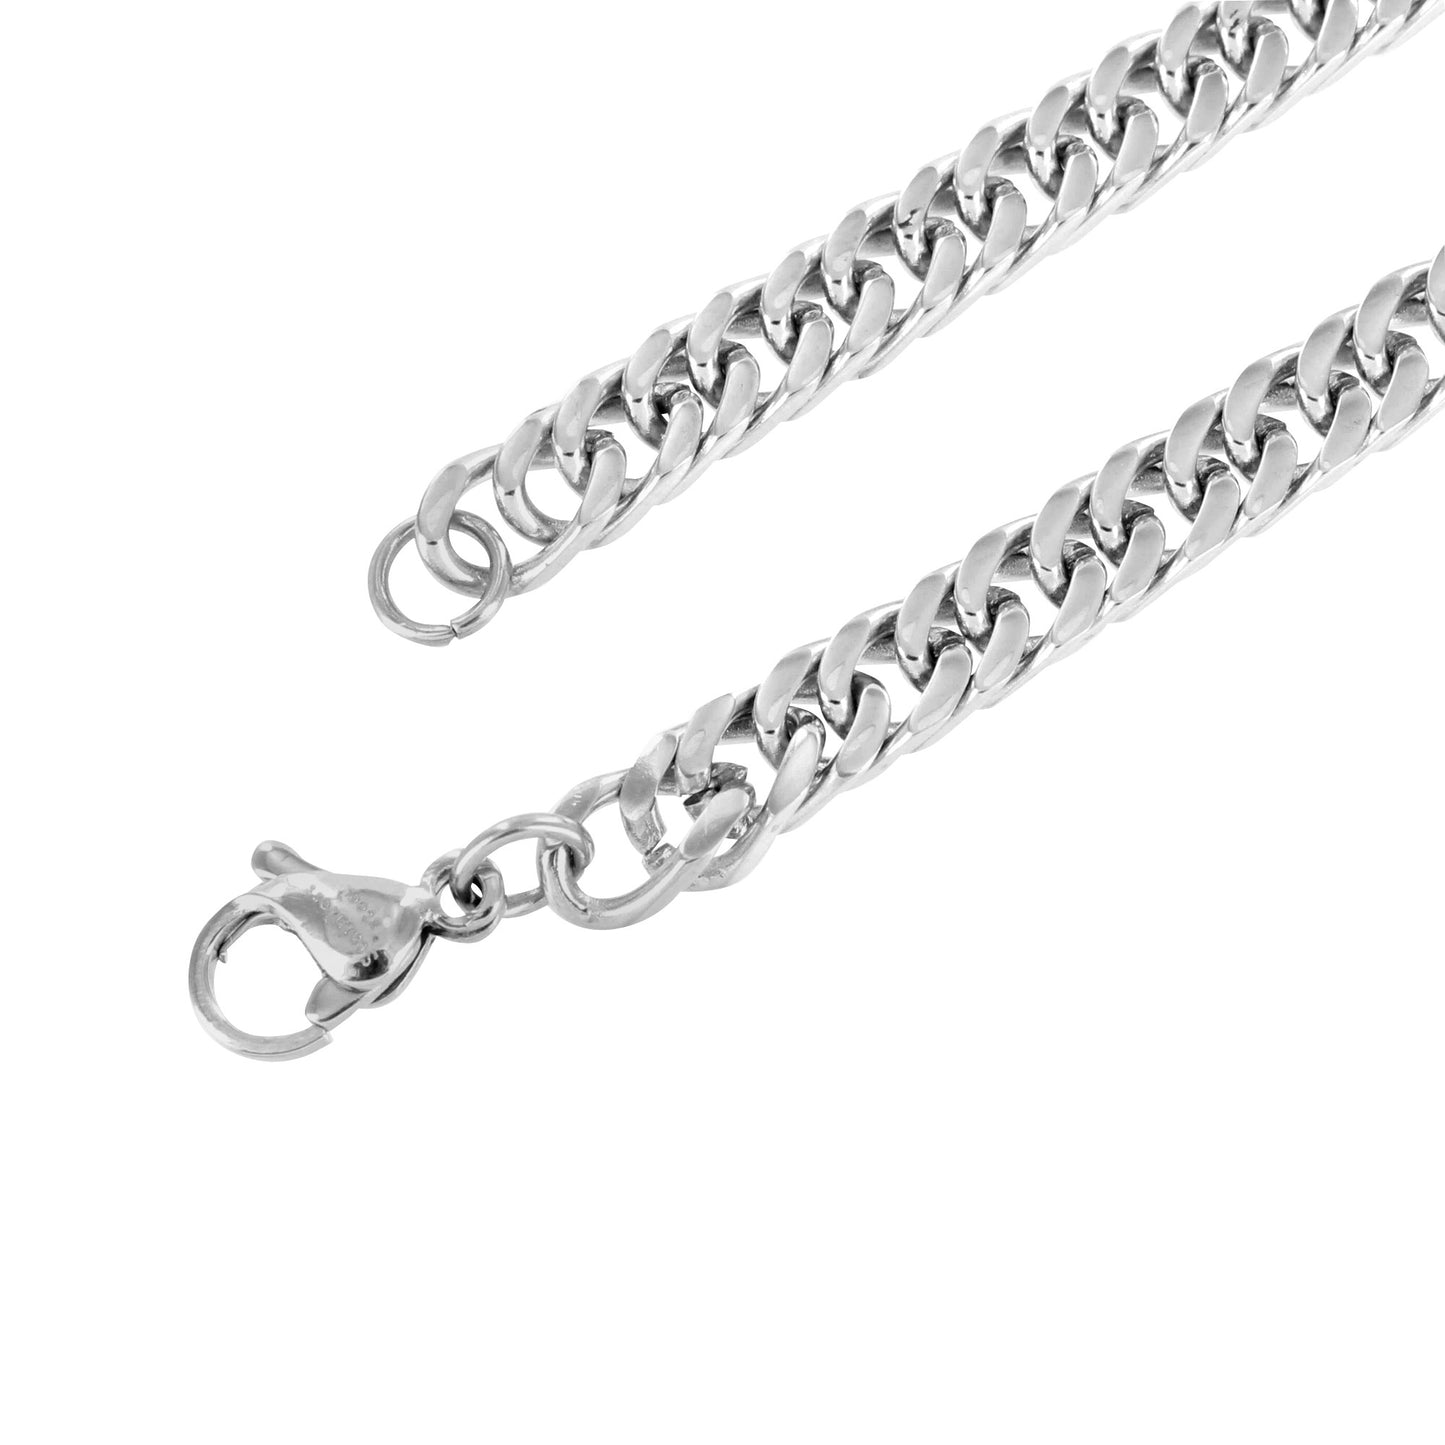 Miami Cuban Stainless Steel White Gold Finish 4 MM 30" Chain